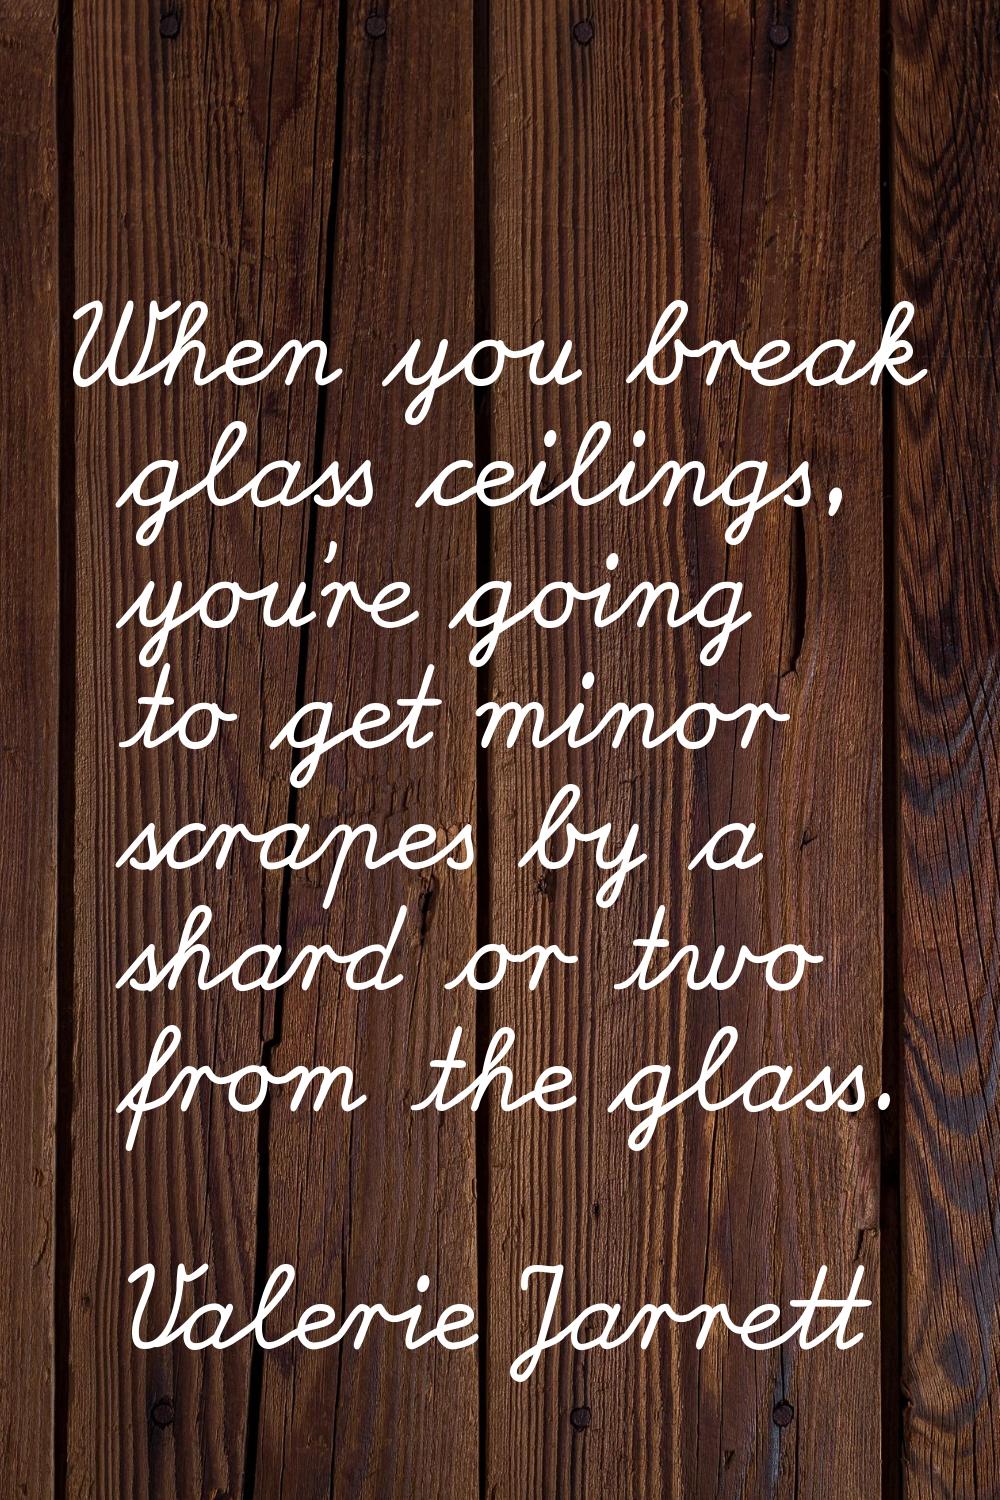 When you break glass ceilings, you're going to get minor scrapes by a shard or two from the glass.